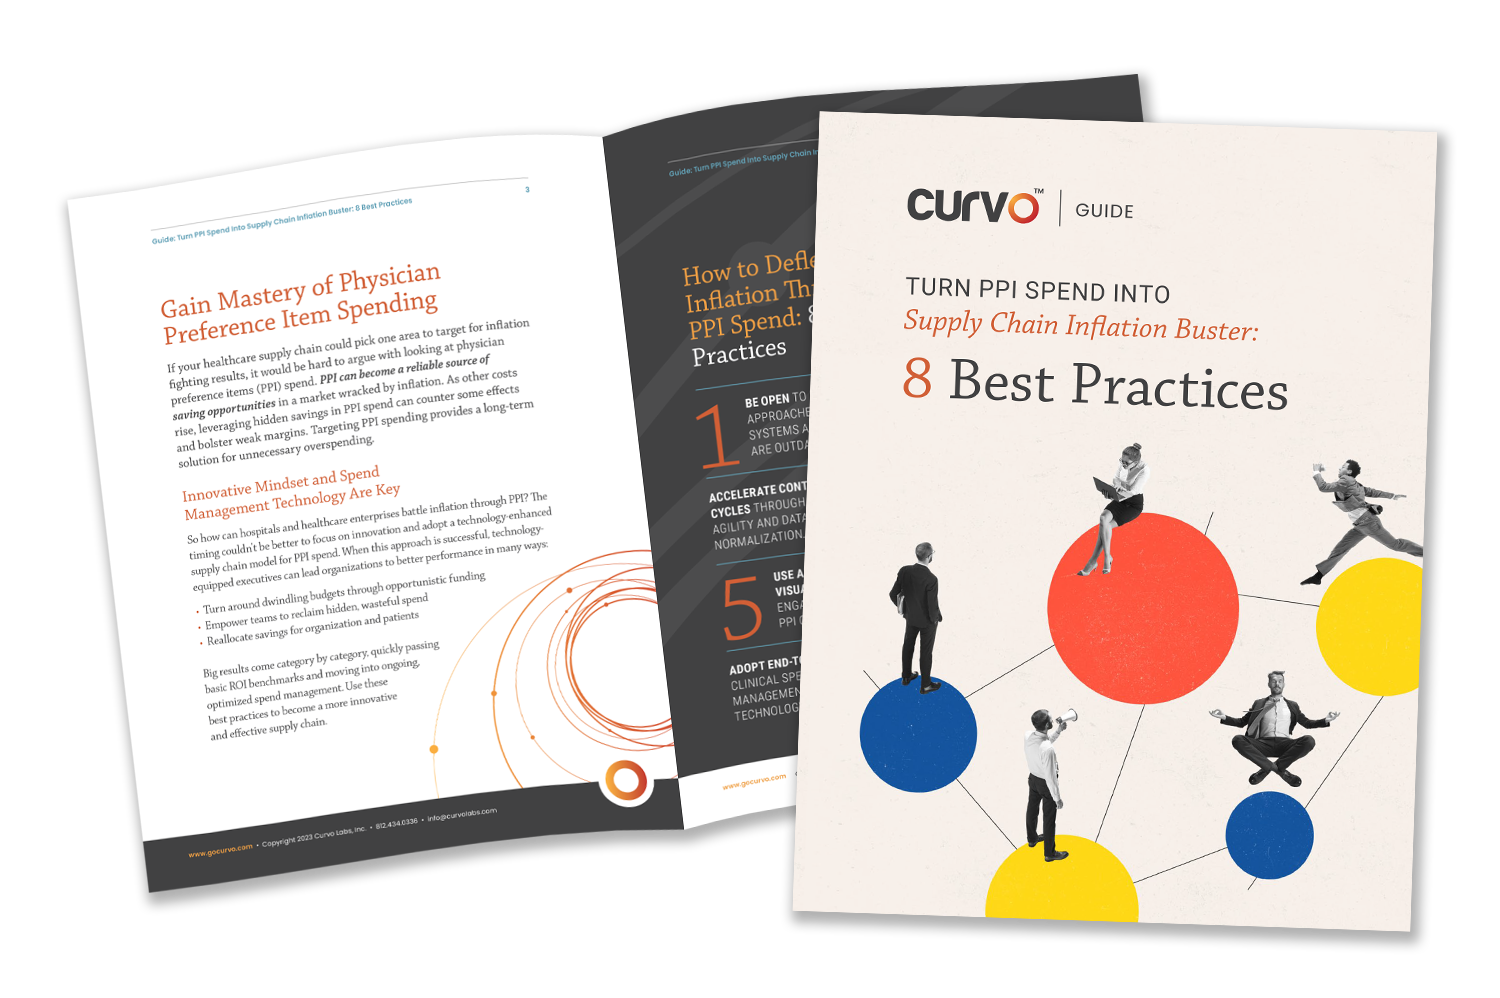 Curvo - Turn PPI Spend Into Supply Chain Inflation Buster 8 Best Practices - Guide - mockup